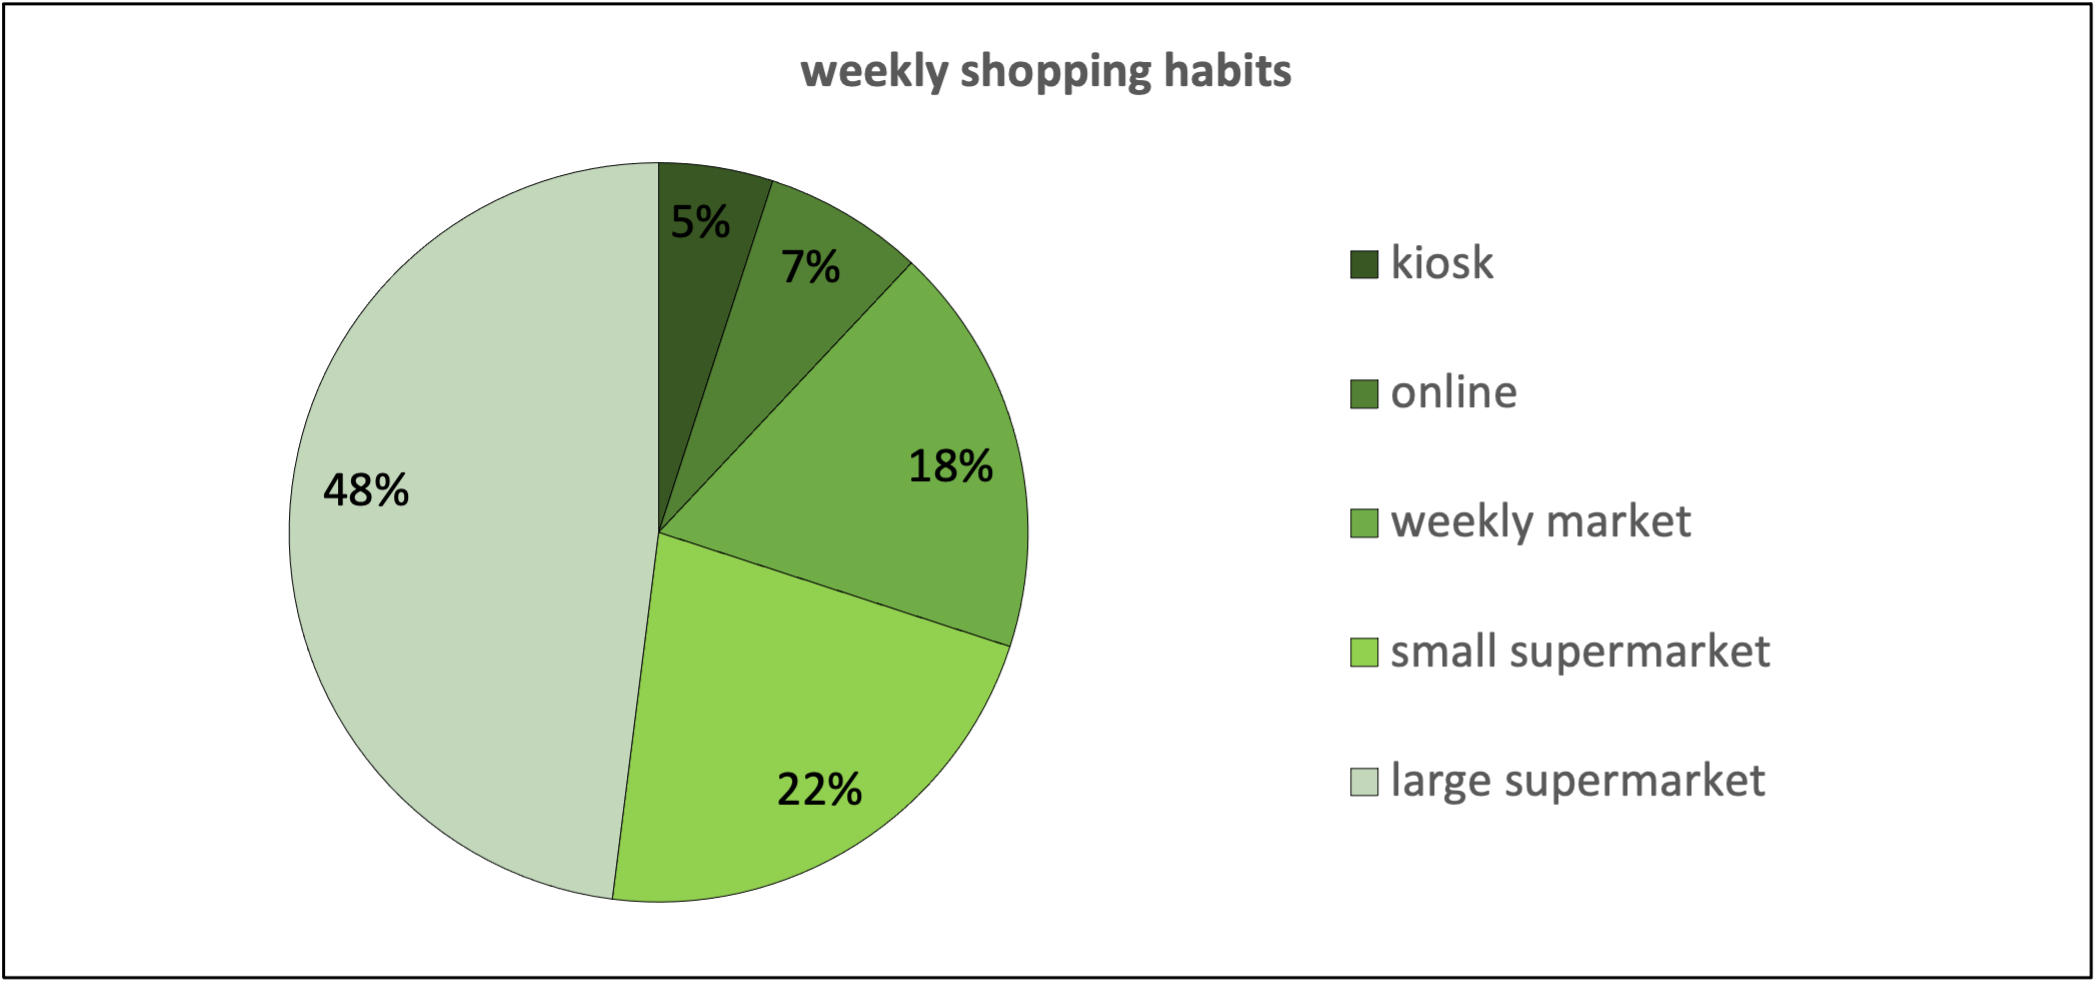 Figure 2: Question about shopping habits and weekly shopping locations, n=49 
        Source: own figure
        